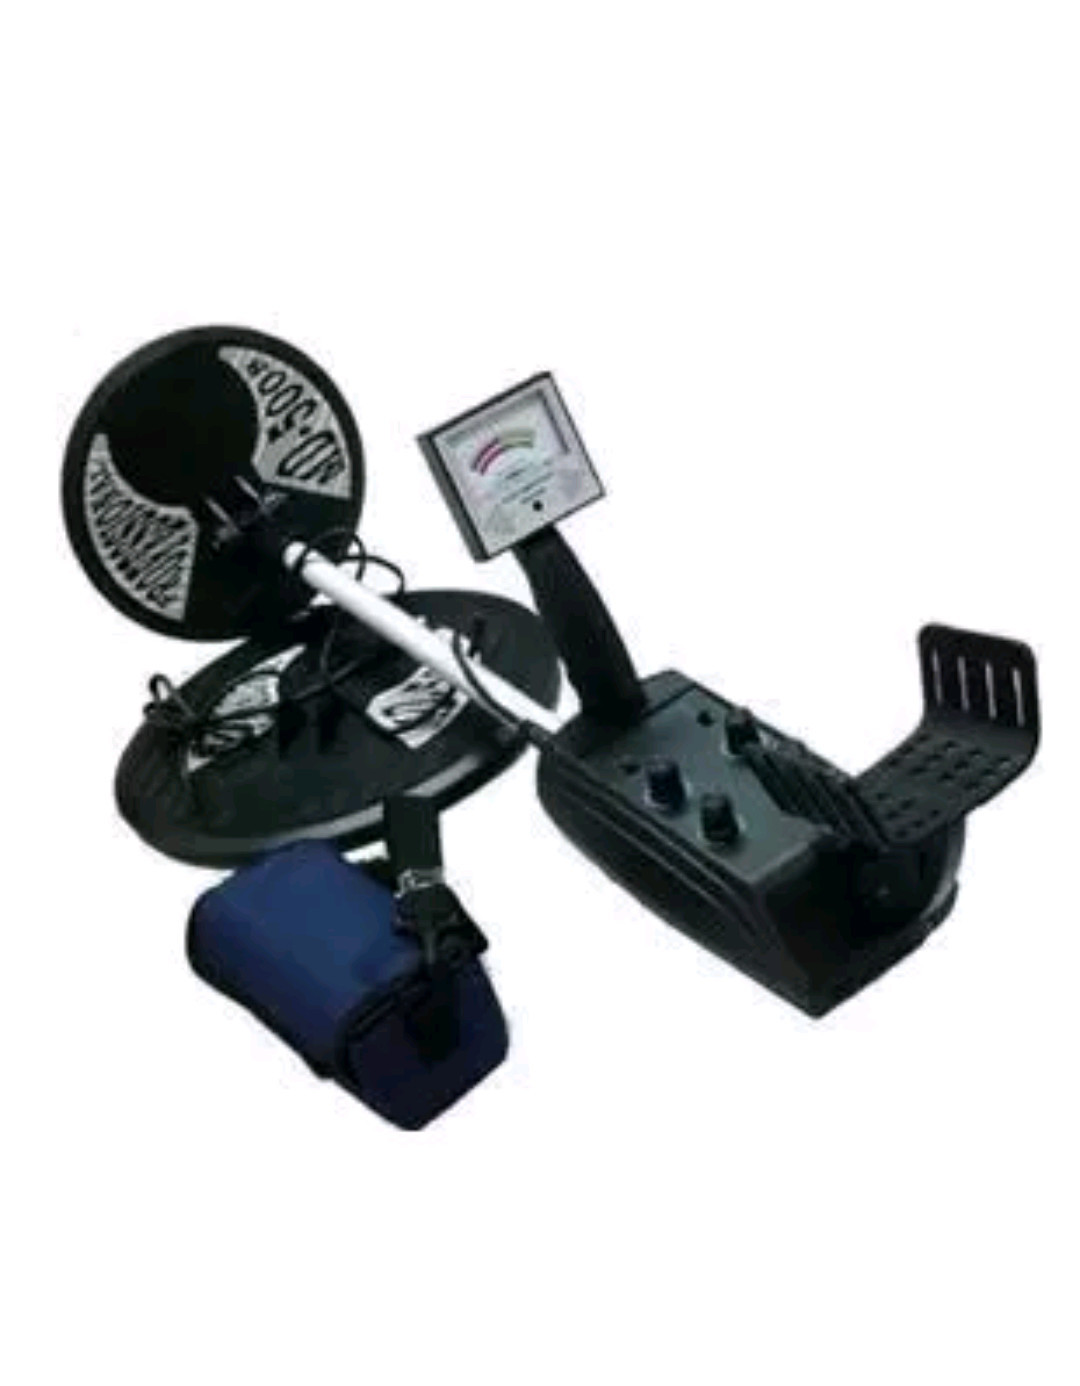 Buy cheap underground metal detector product